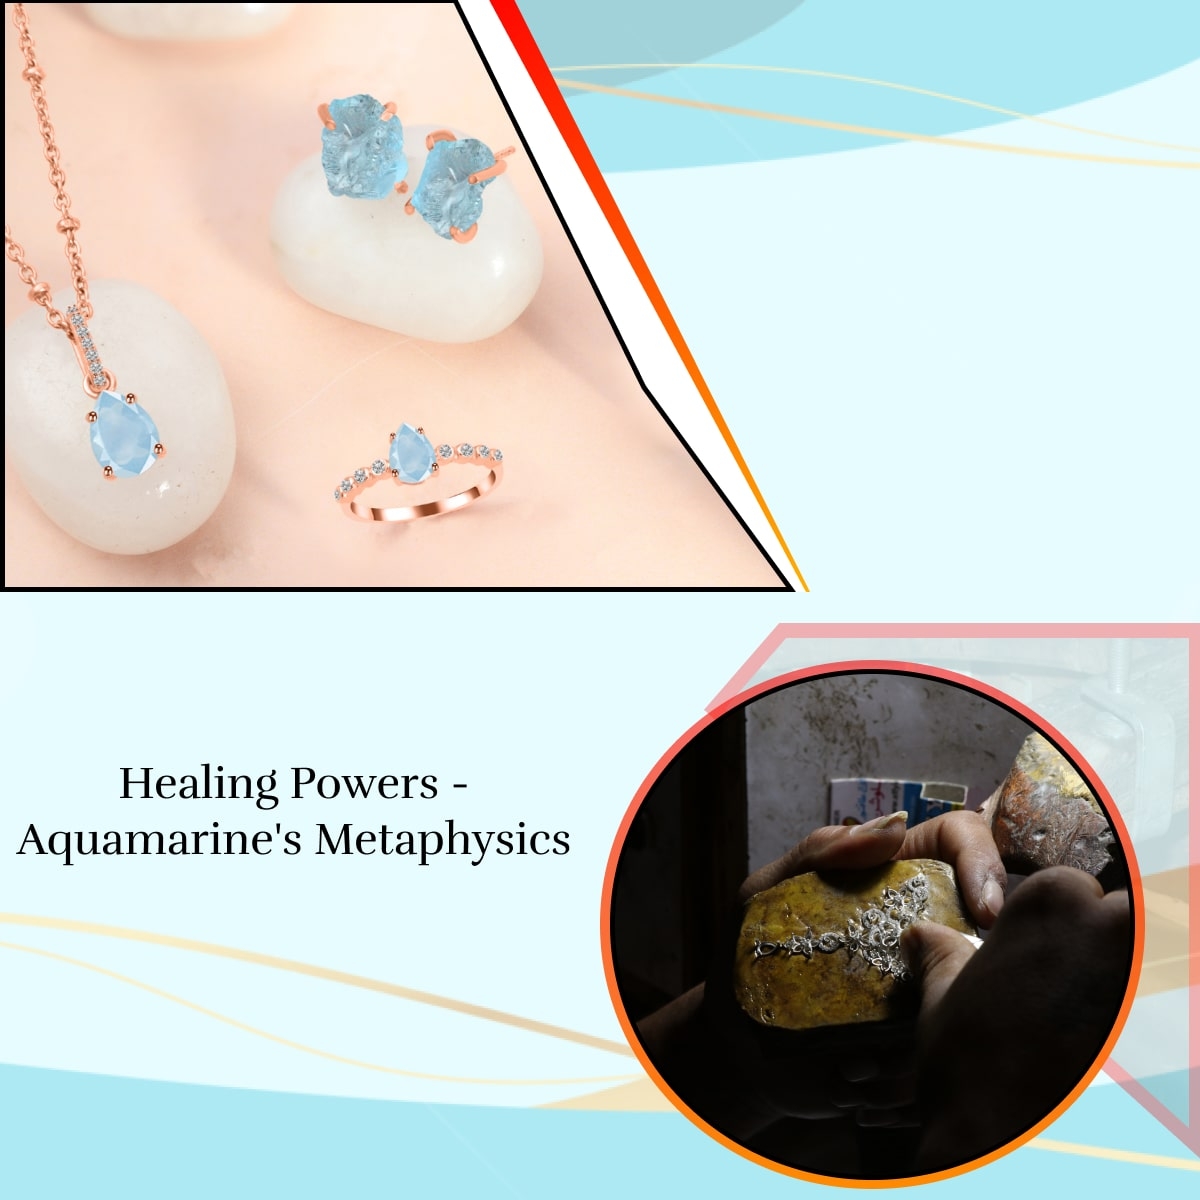 Healing Properties and Metaphysical Significance of Aquamarine